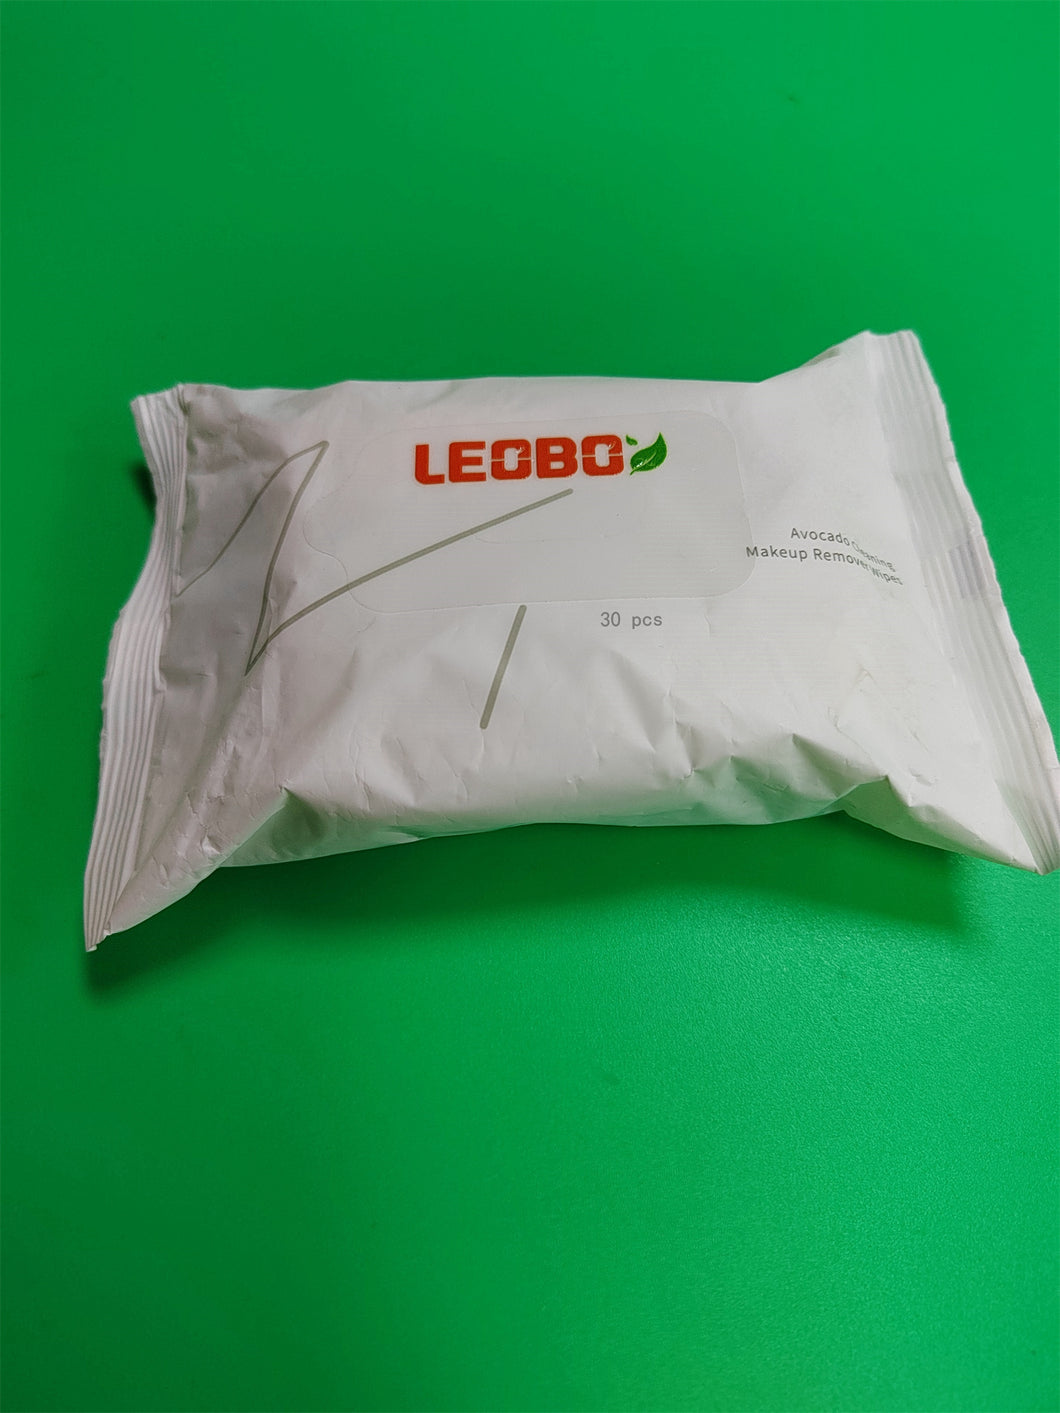 LEOBOX Wipes impregnated with a cleaning preparation， non-alcoholic makeup remover wipes